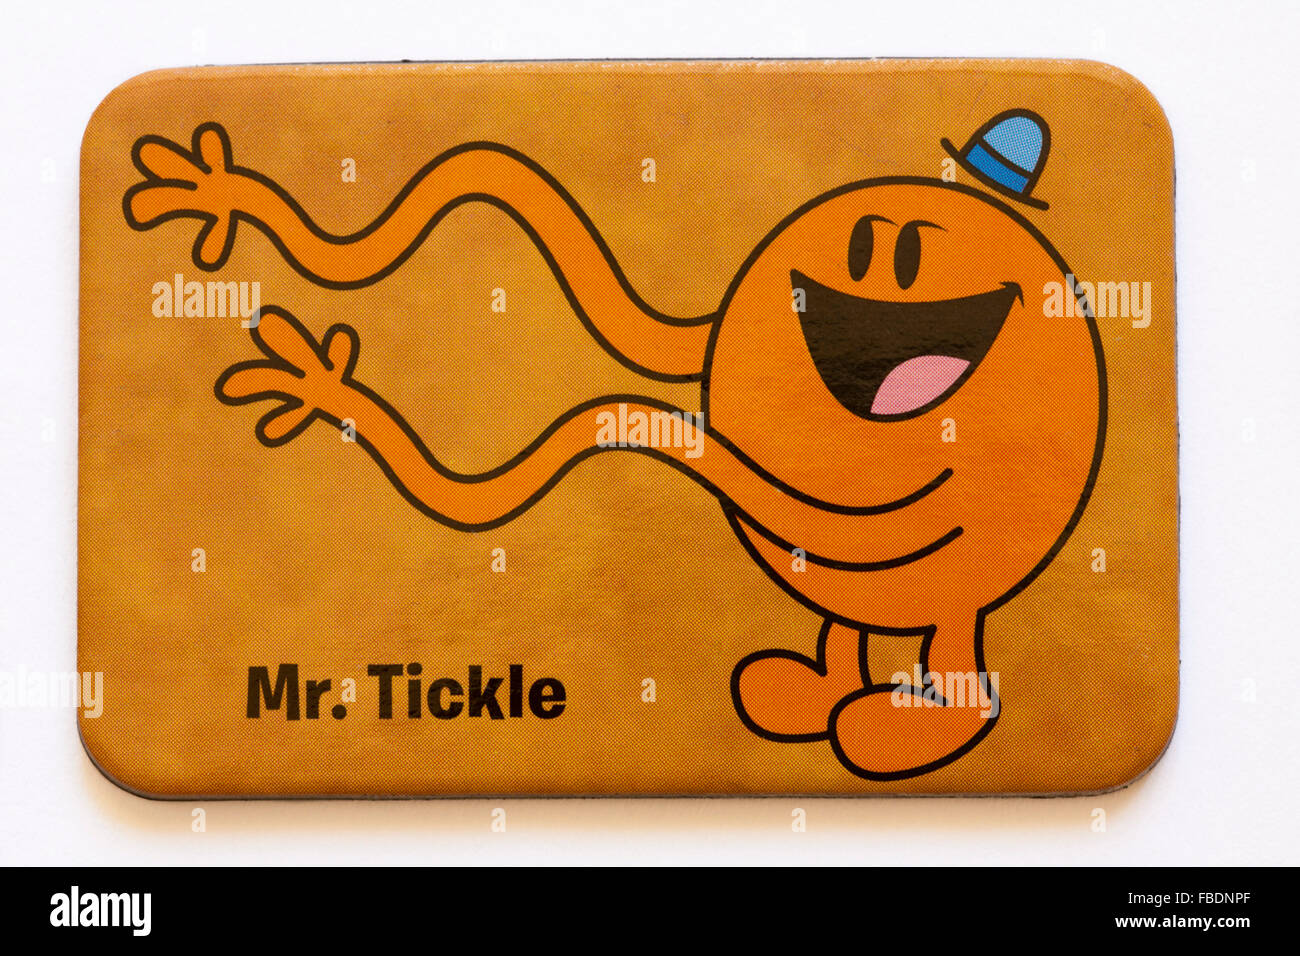 Mr Tickle coaster from Mr Men series isolated on white background Stock Photo